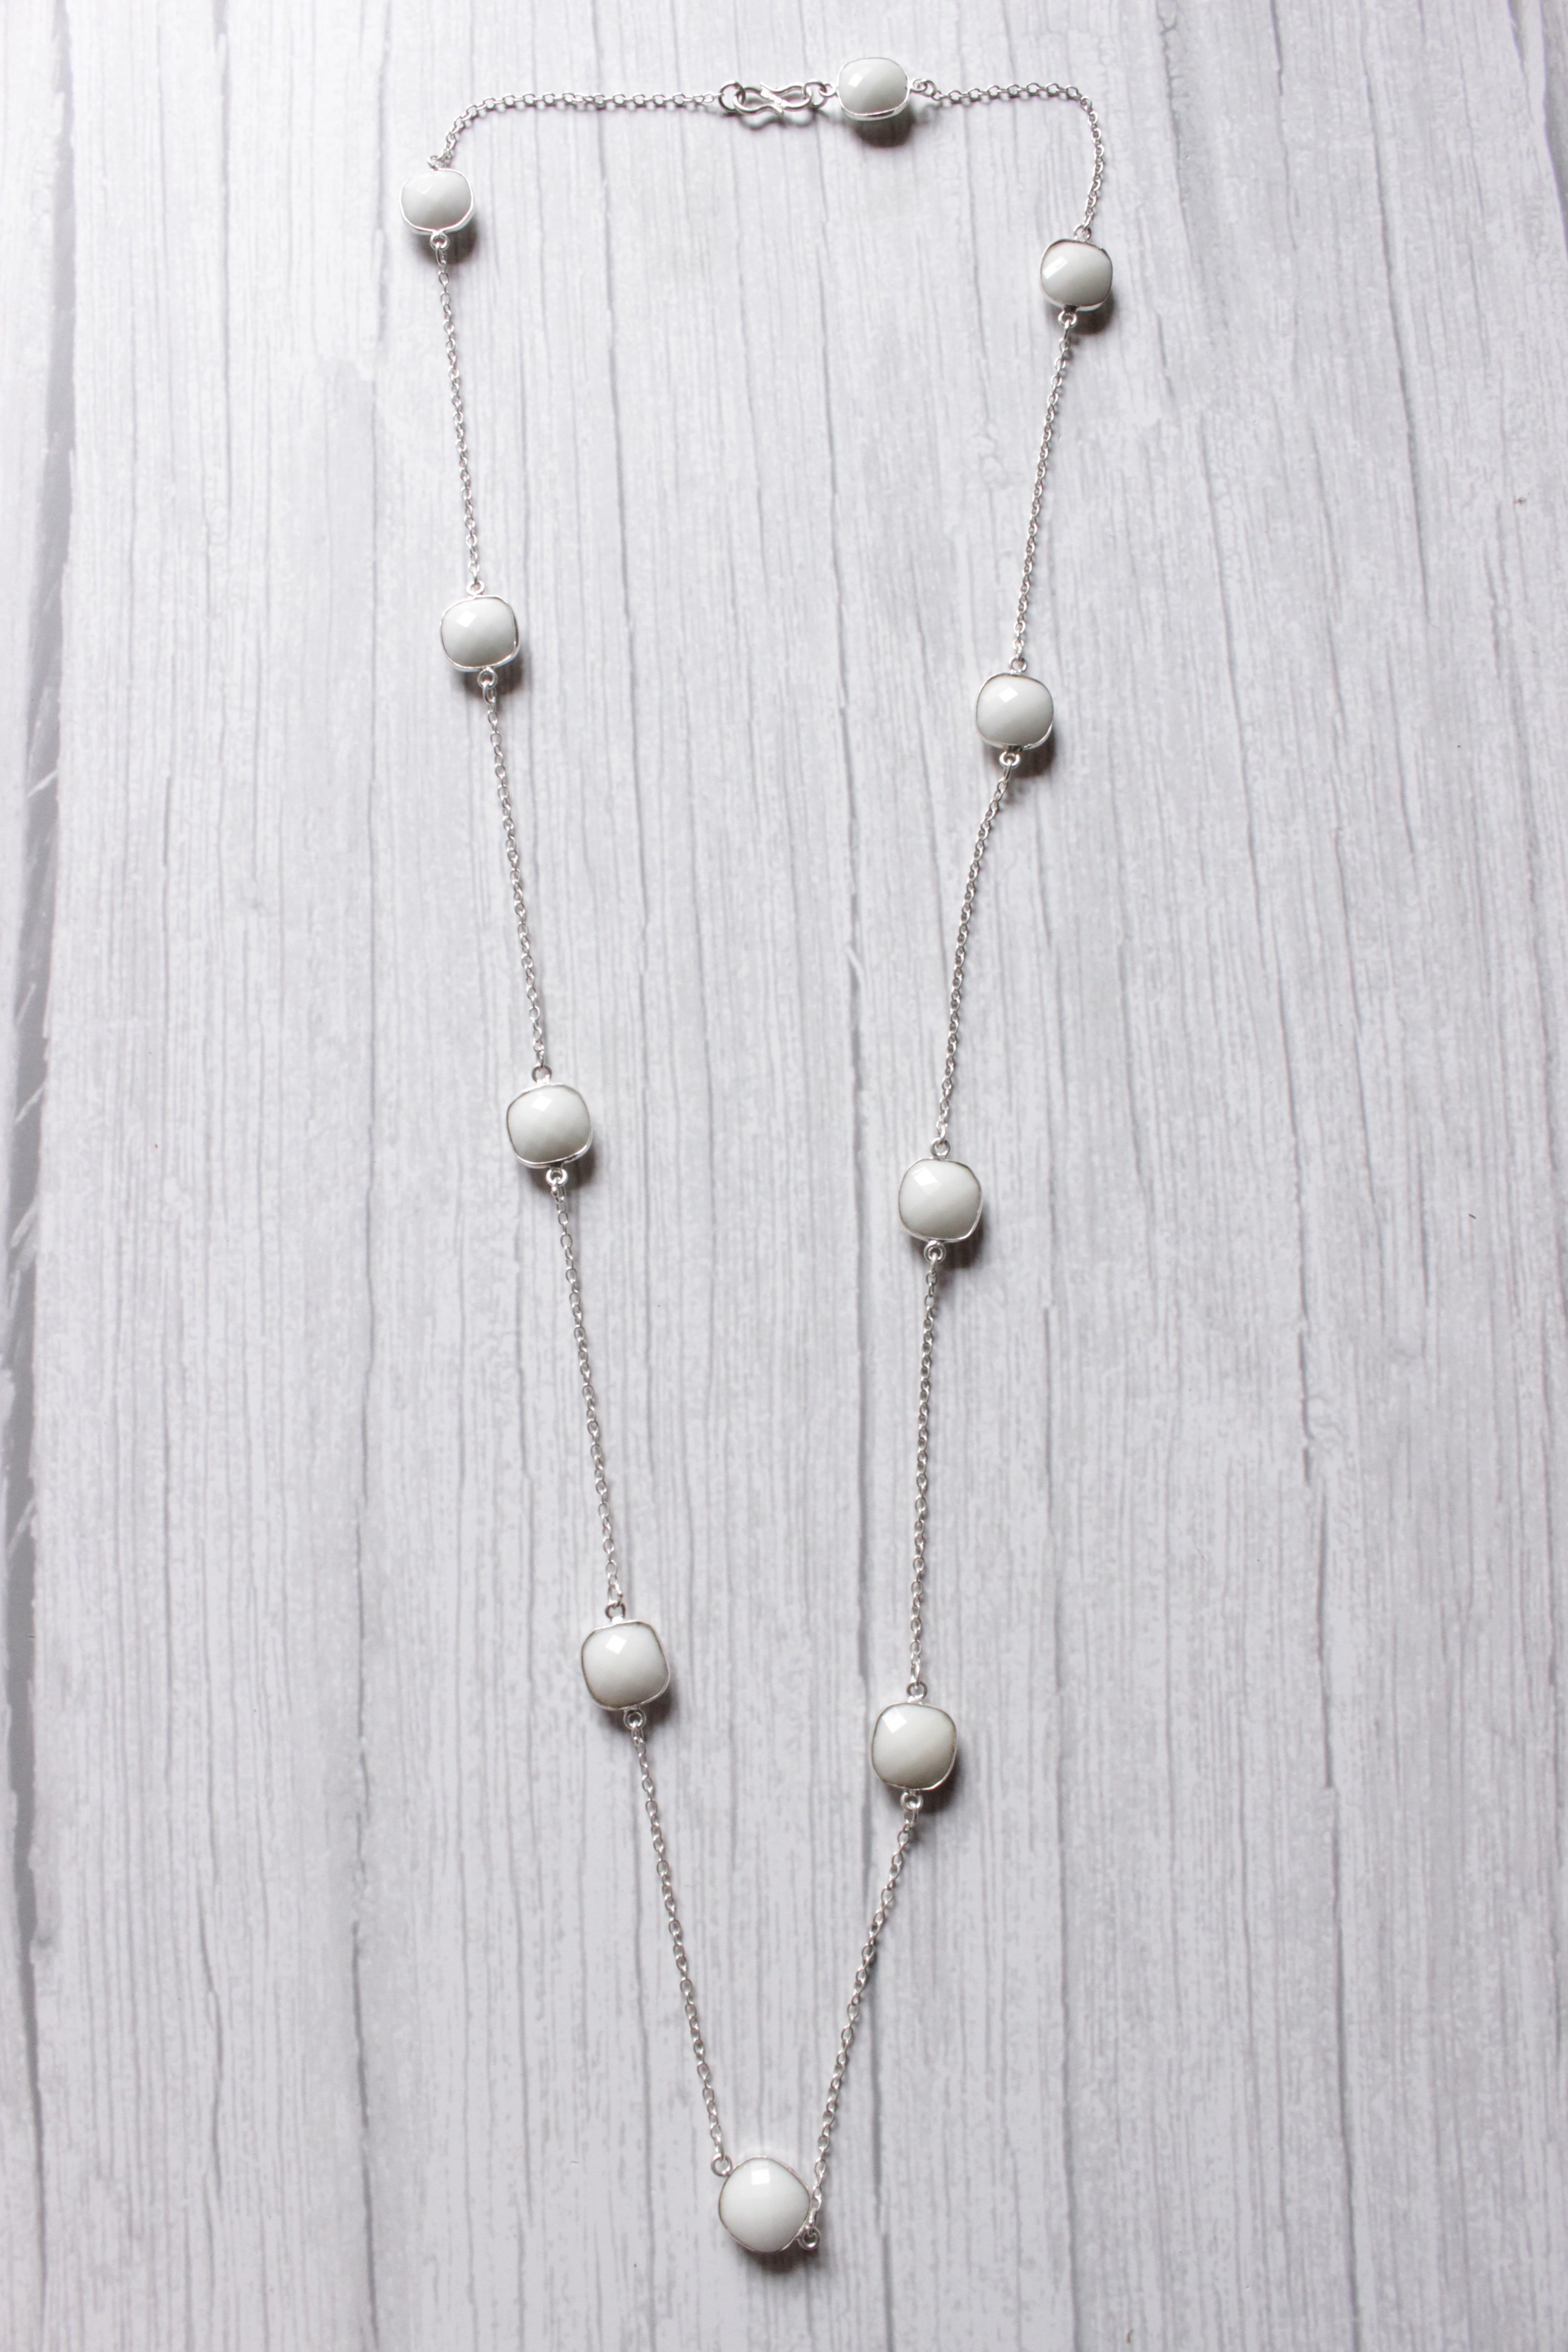 Faceted White Coral Quartz Gemstone Embedded Silver Plated Bezel Connector Chain Necklace